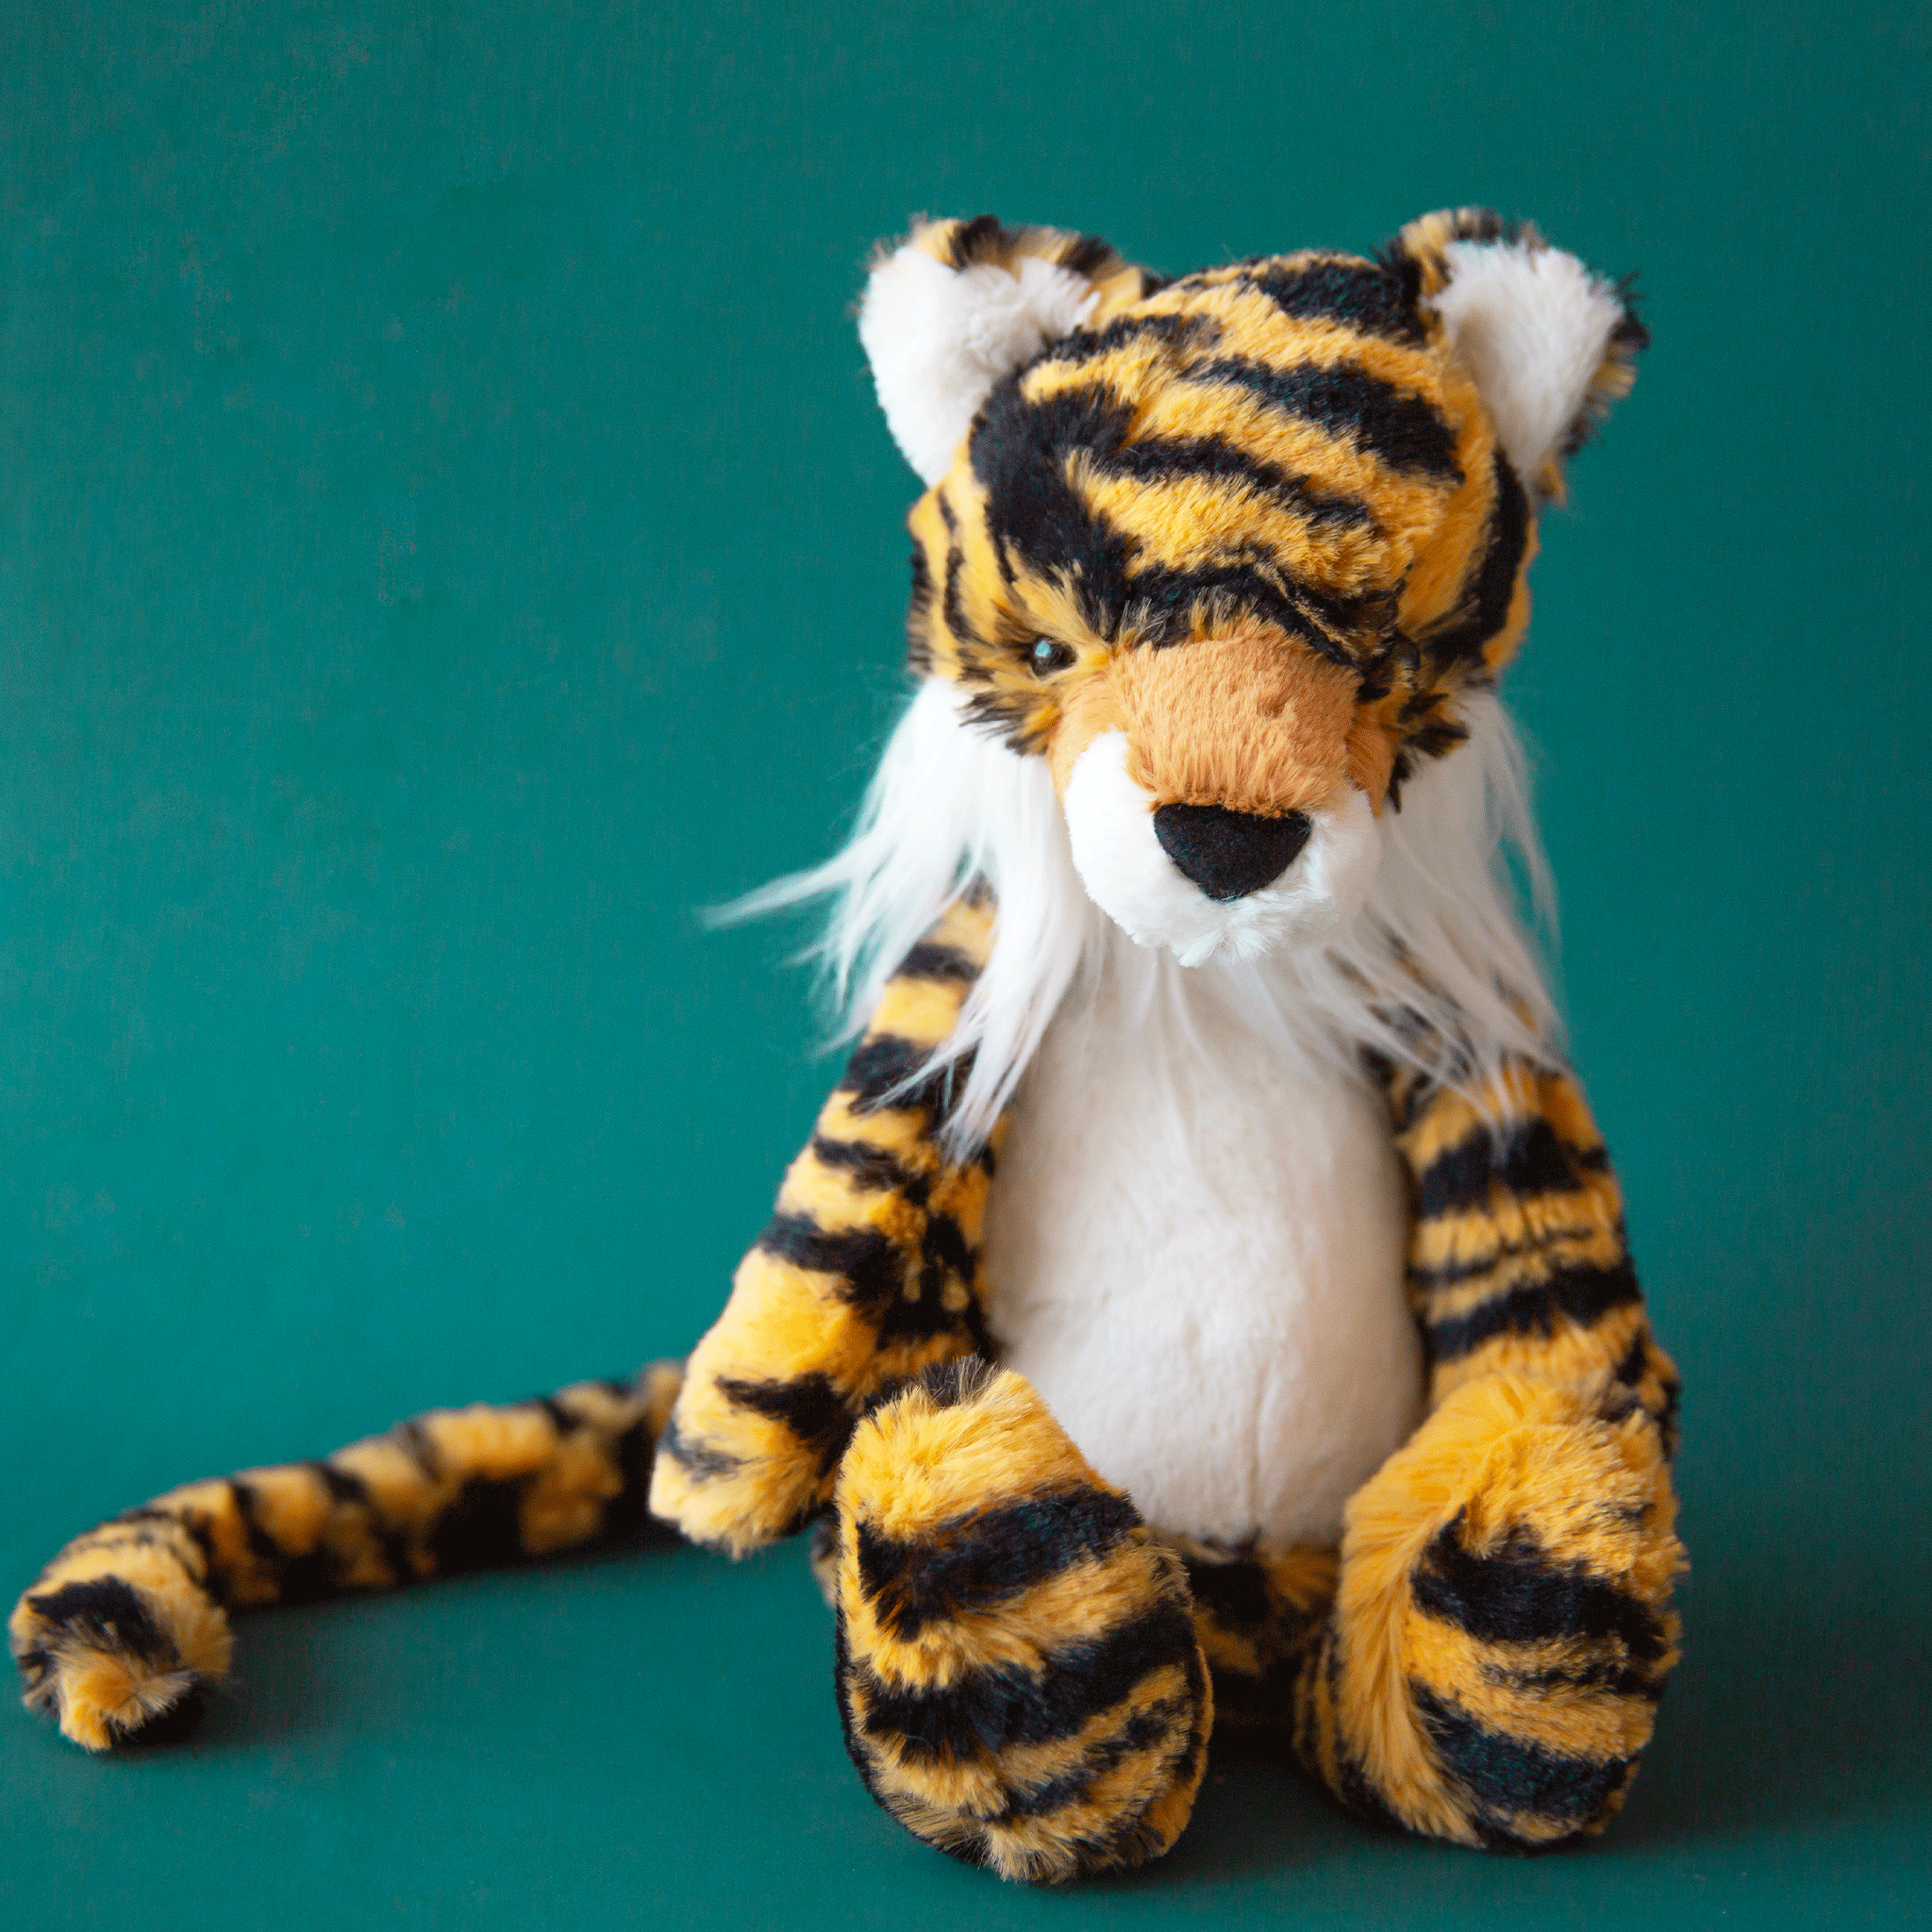 On a teal background is a orange and black striped tiger stuffed toy. 